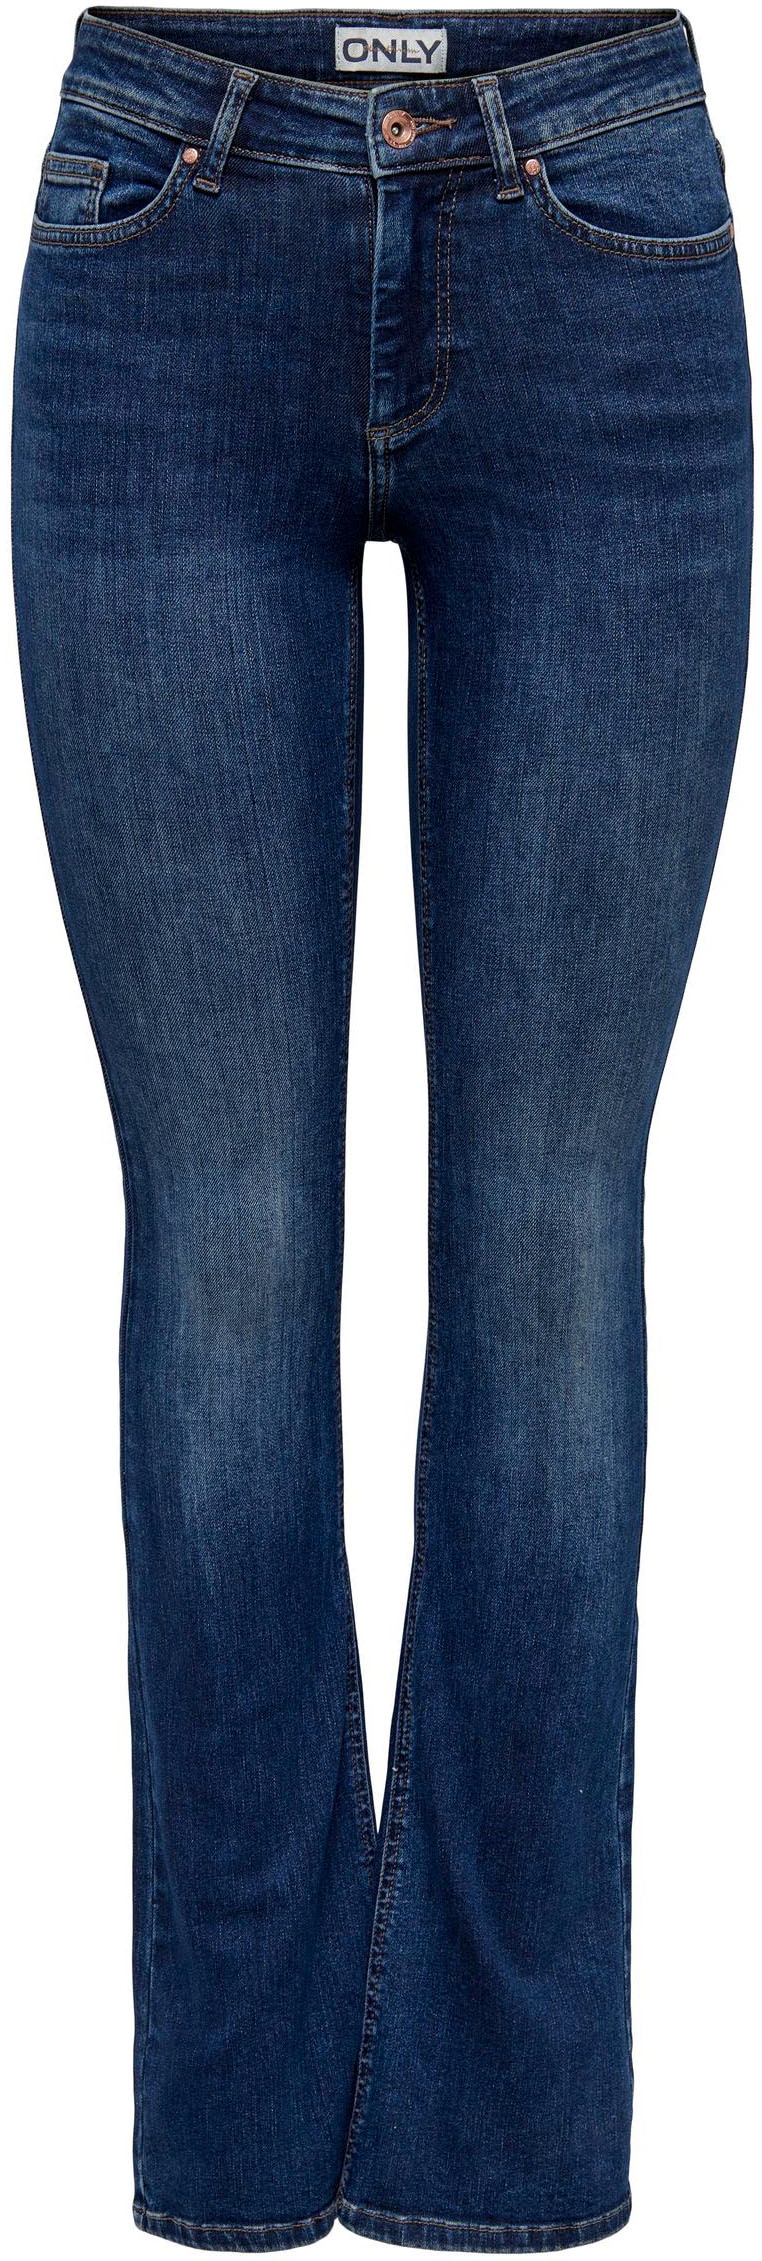 ONLY Bootcut-Jeans »ONLBLUSH MID FLARED bei DNM TAI021« ♕